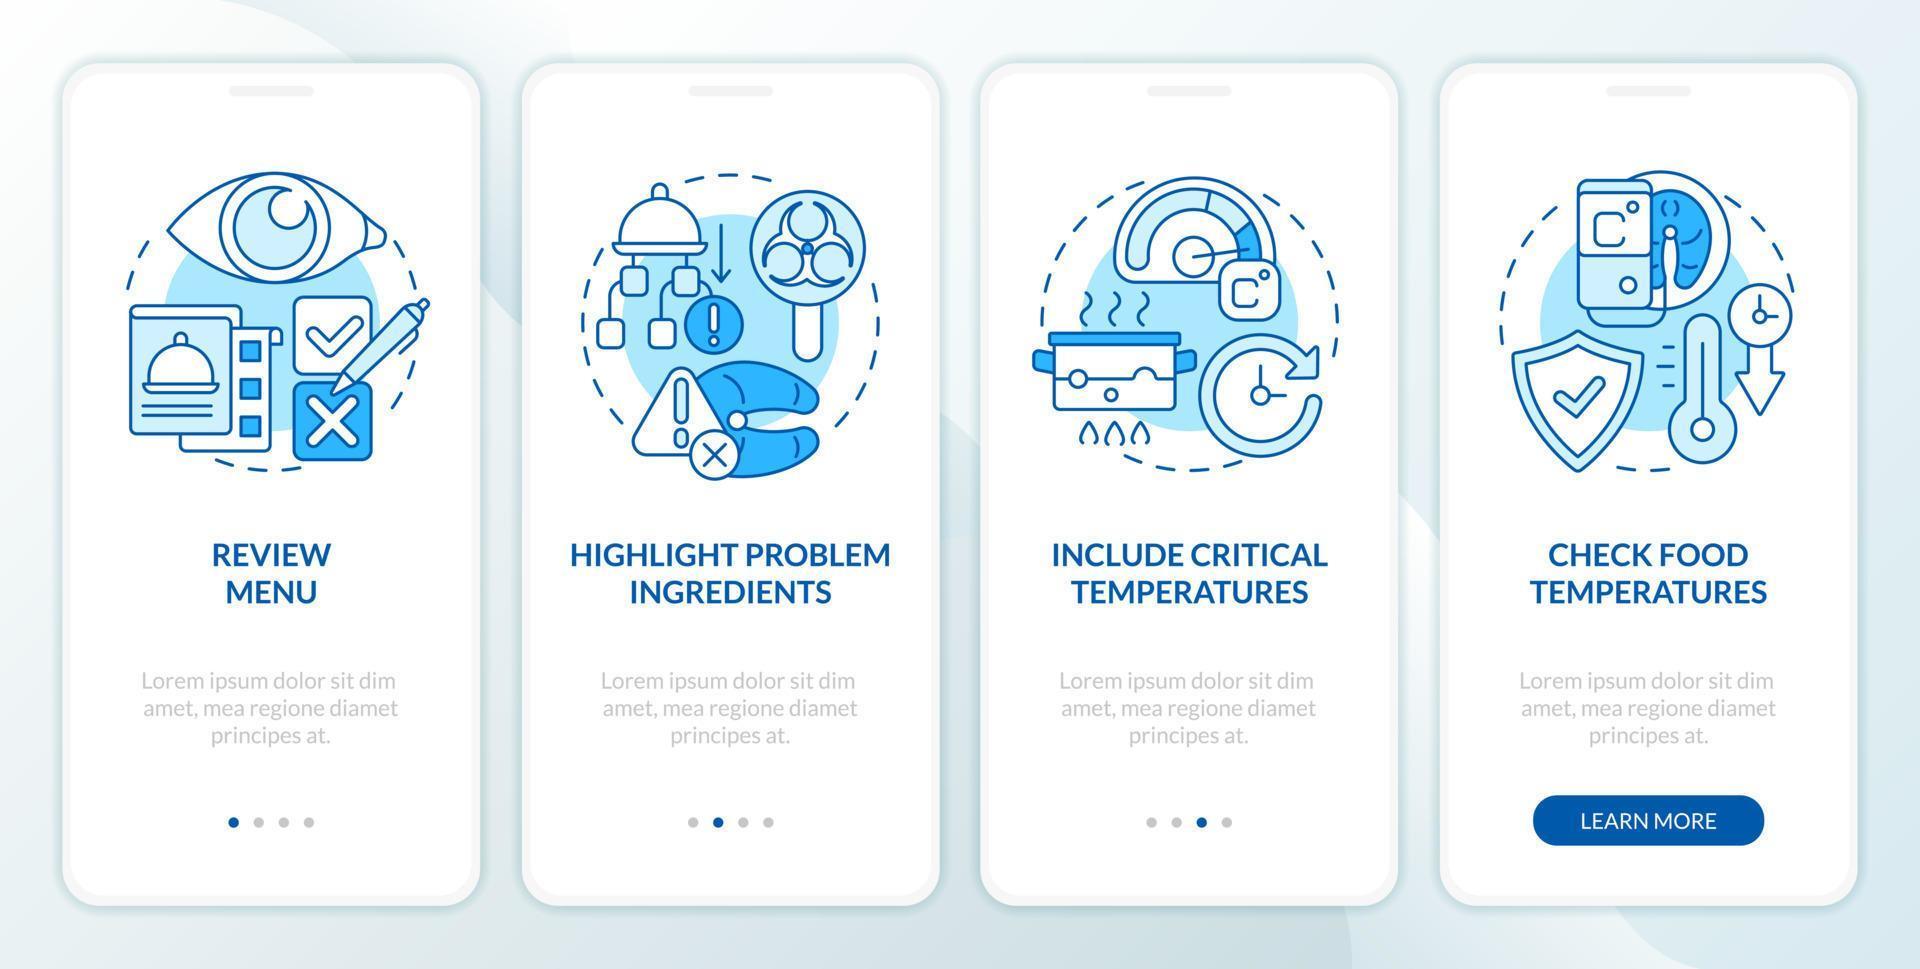 HACCP on practice blue onboarding mobile app screen. Risk analysis walkthrough 4 steps editable graphic instructions with linear concepts. UI, UX, GUI template vector